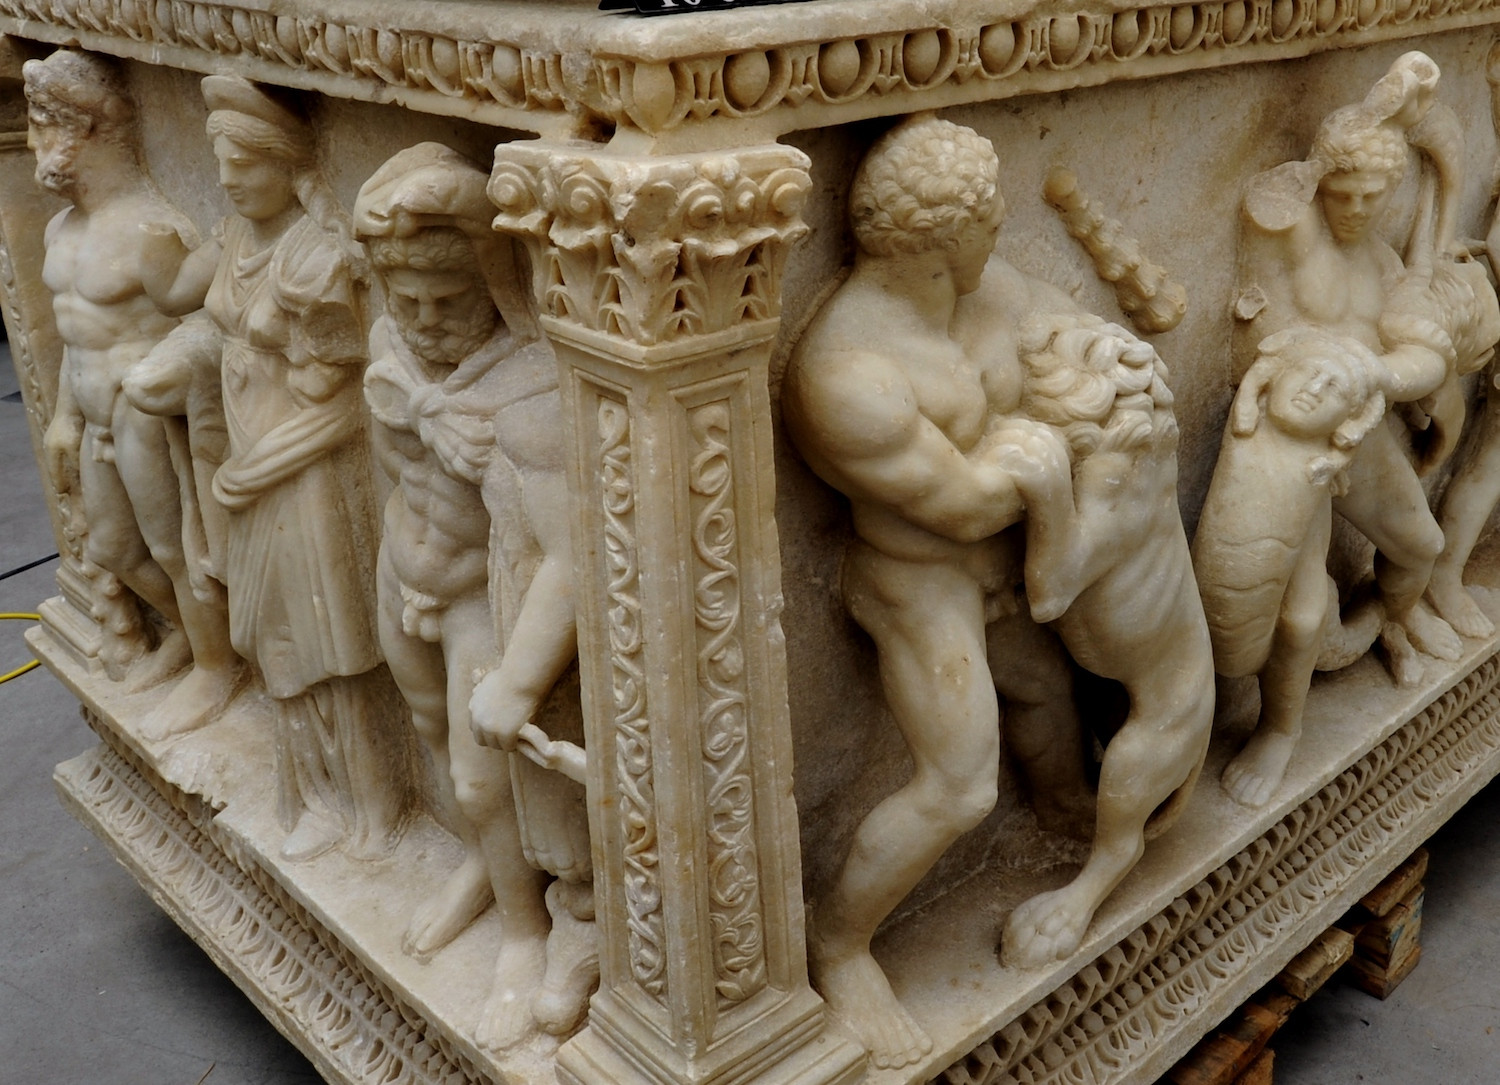 How did the Perge Hercules Sarcophagus find its way back to Turkey?